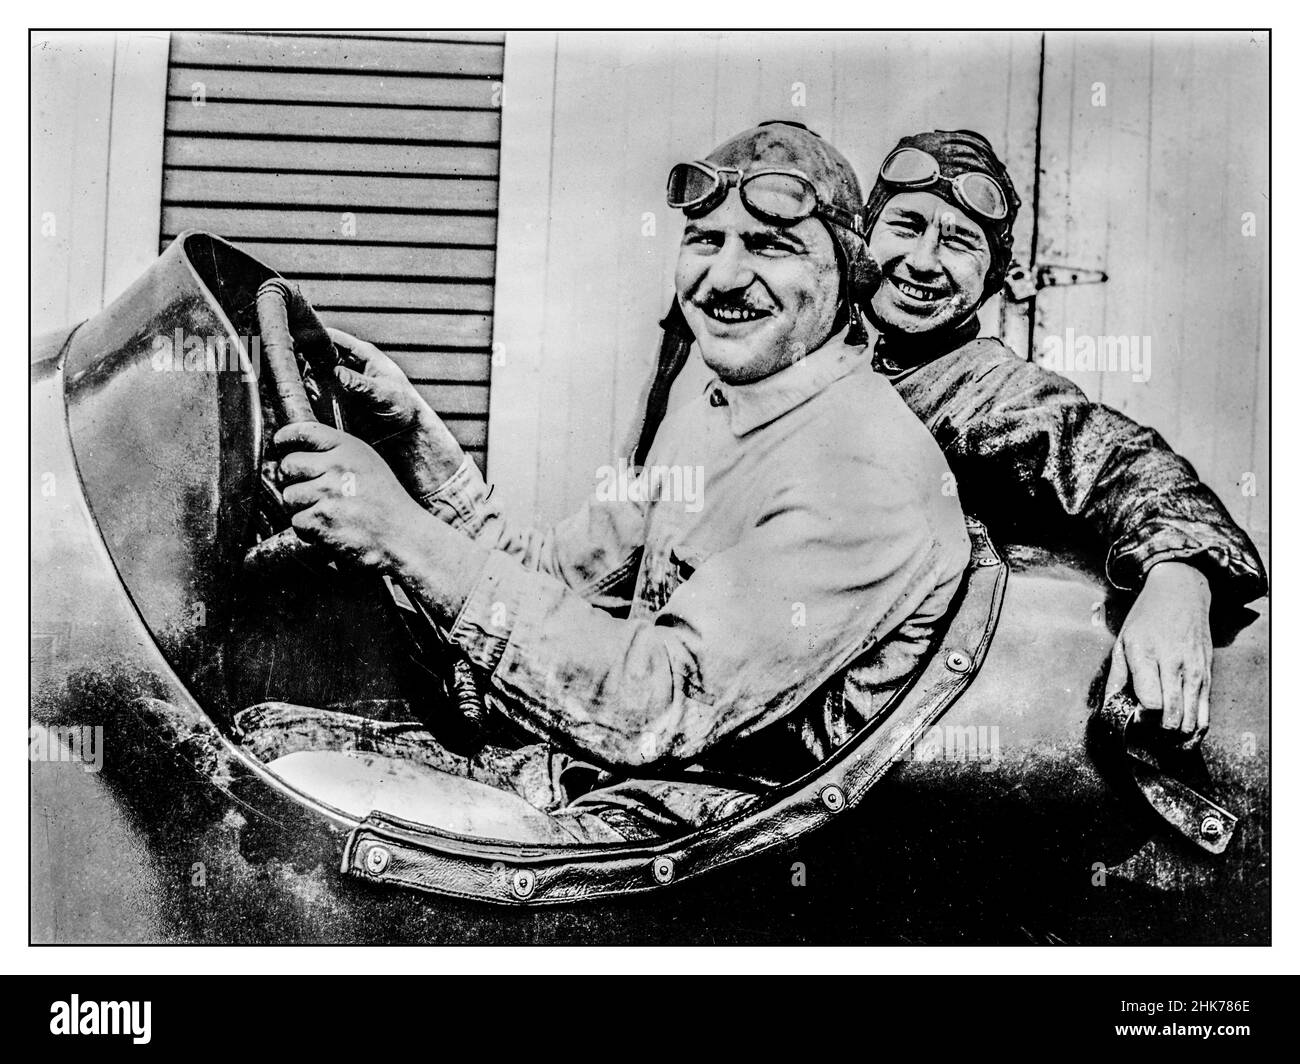 Louis-Joseph Chevrolet  December 25, 1878 – June 6, 1941)  a Swiss-American race car driver, co-founder of the Chevrolet Motor Car Company in 1911, and a founder in 1916 of the Frontenac Motor Corporation. Indy 500, Louis-Joseph Chevrolet  1916, Louis Chevrolet and his brothers founded the Frontenac Motor Corporation to make racing parts for Ford Model Ts. Chevrolet 1920 Stock Photo